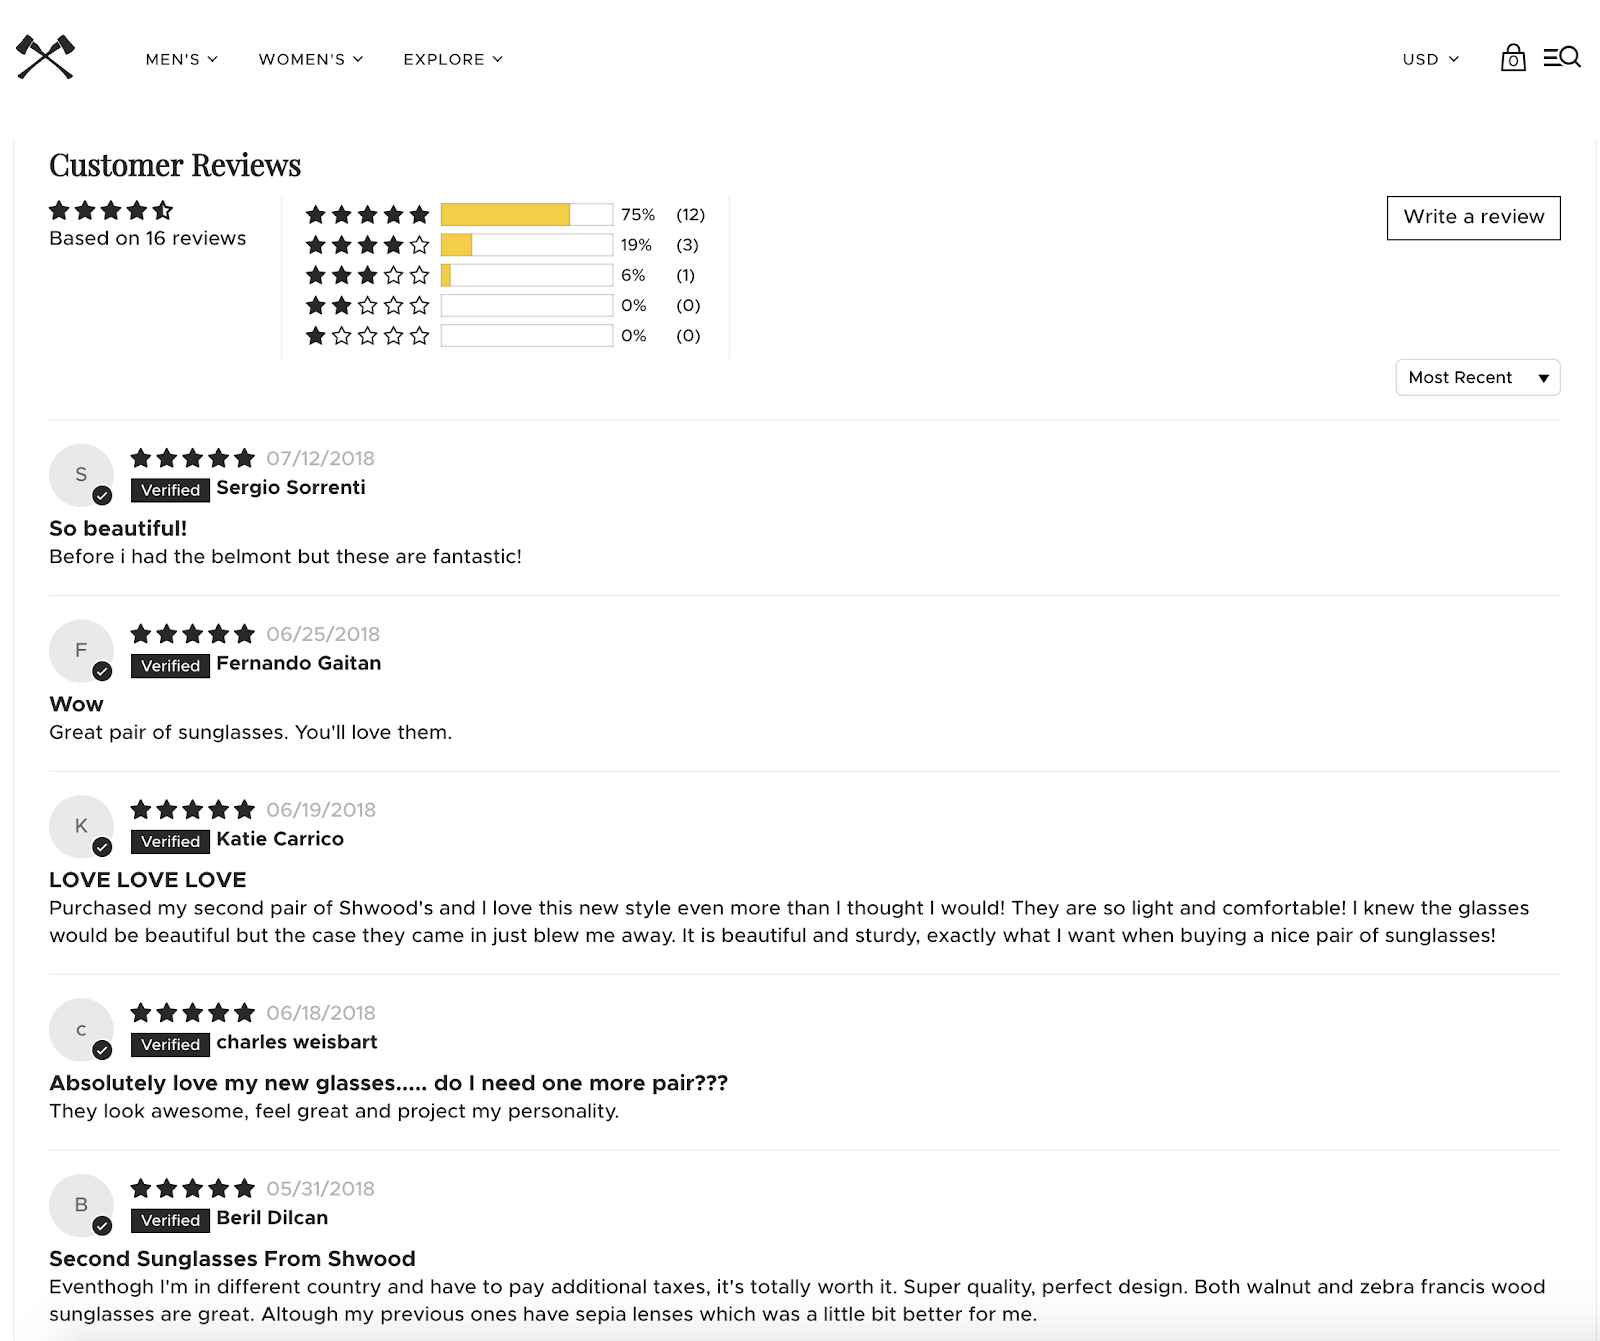 Screenshot showing Amazon reviews for a product